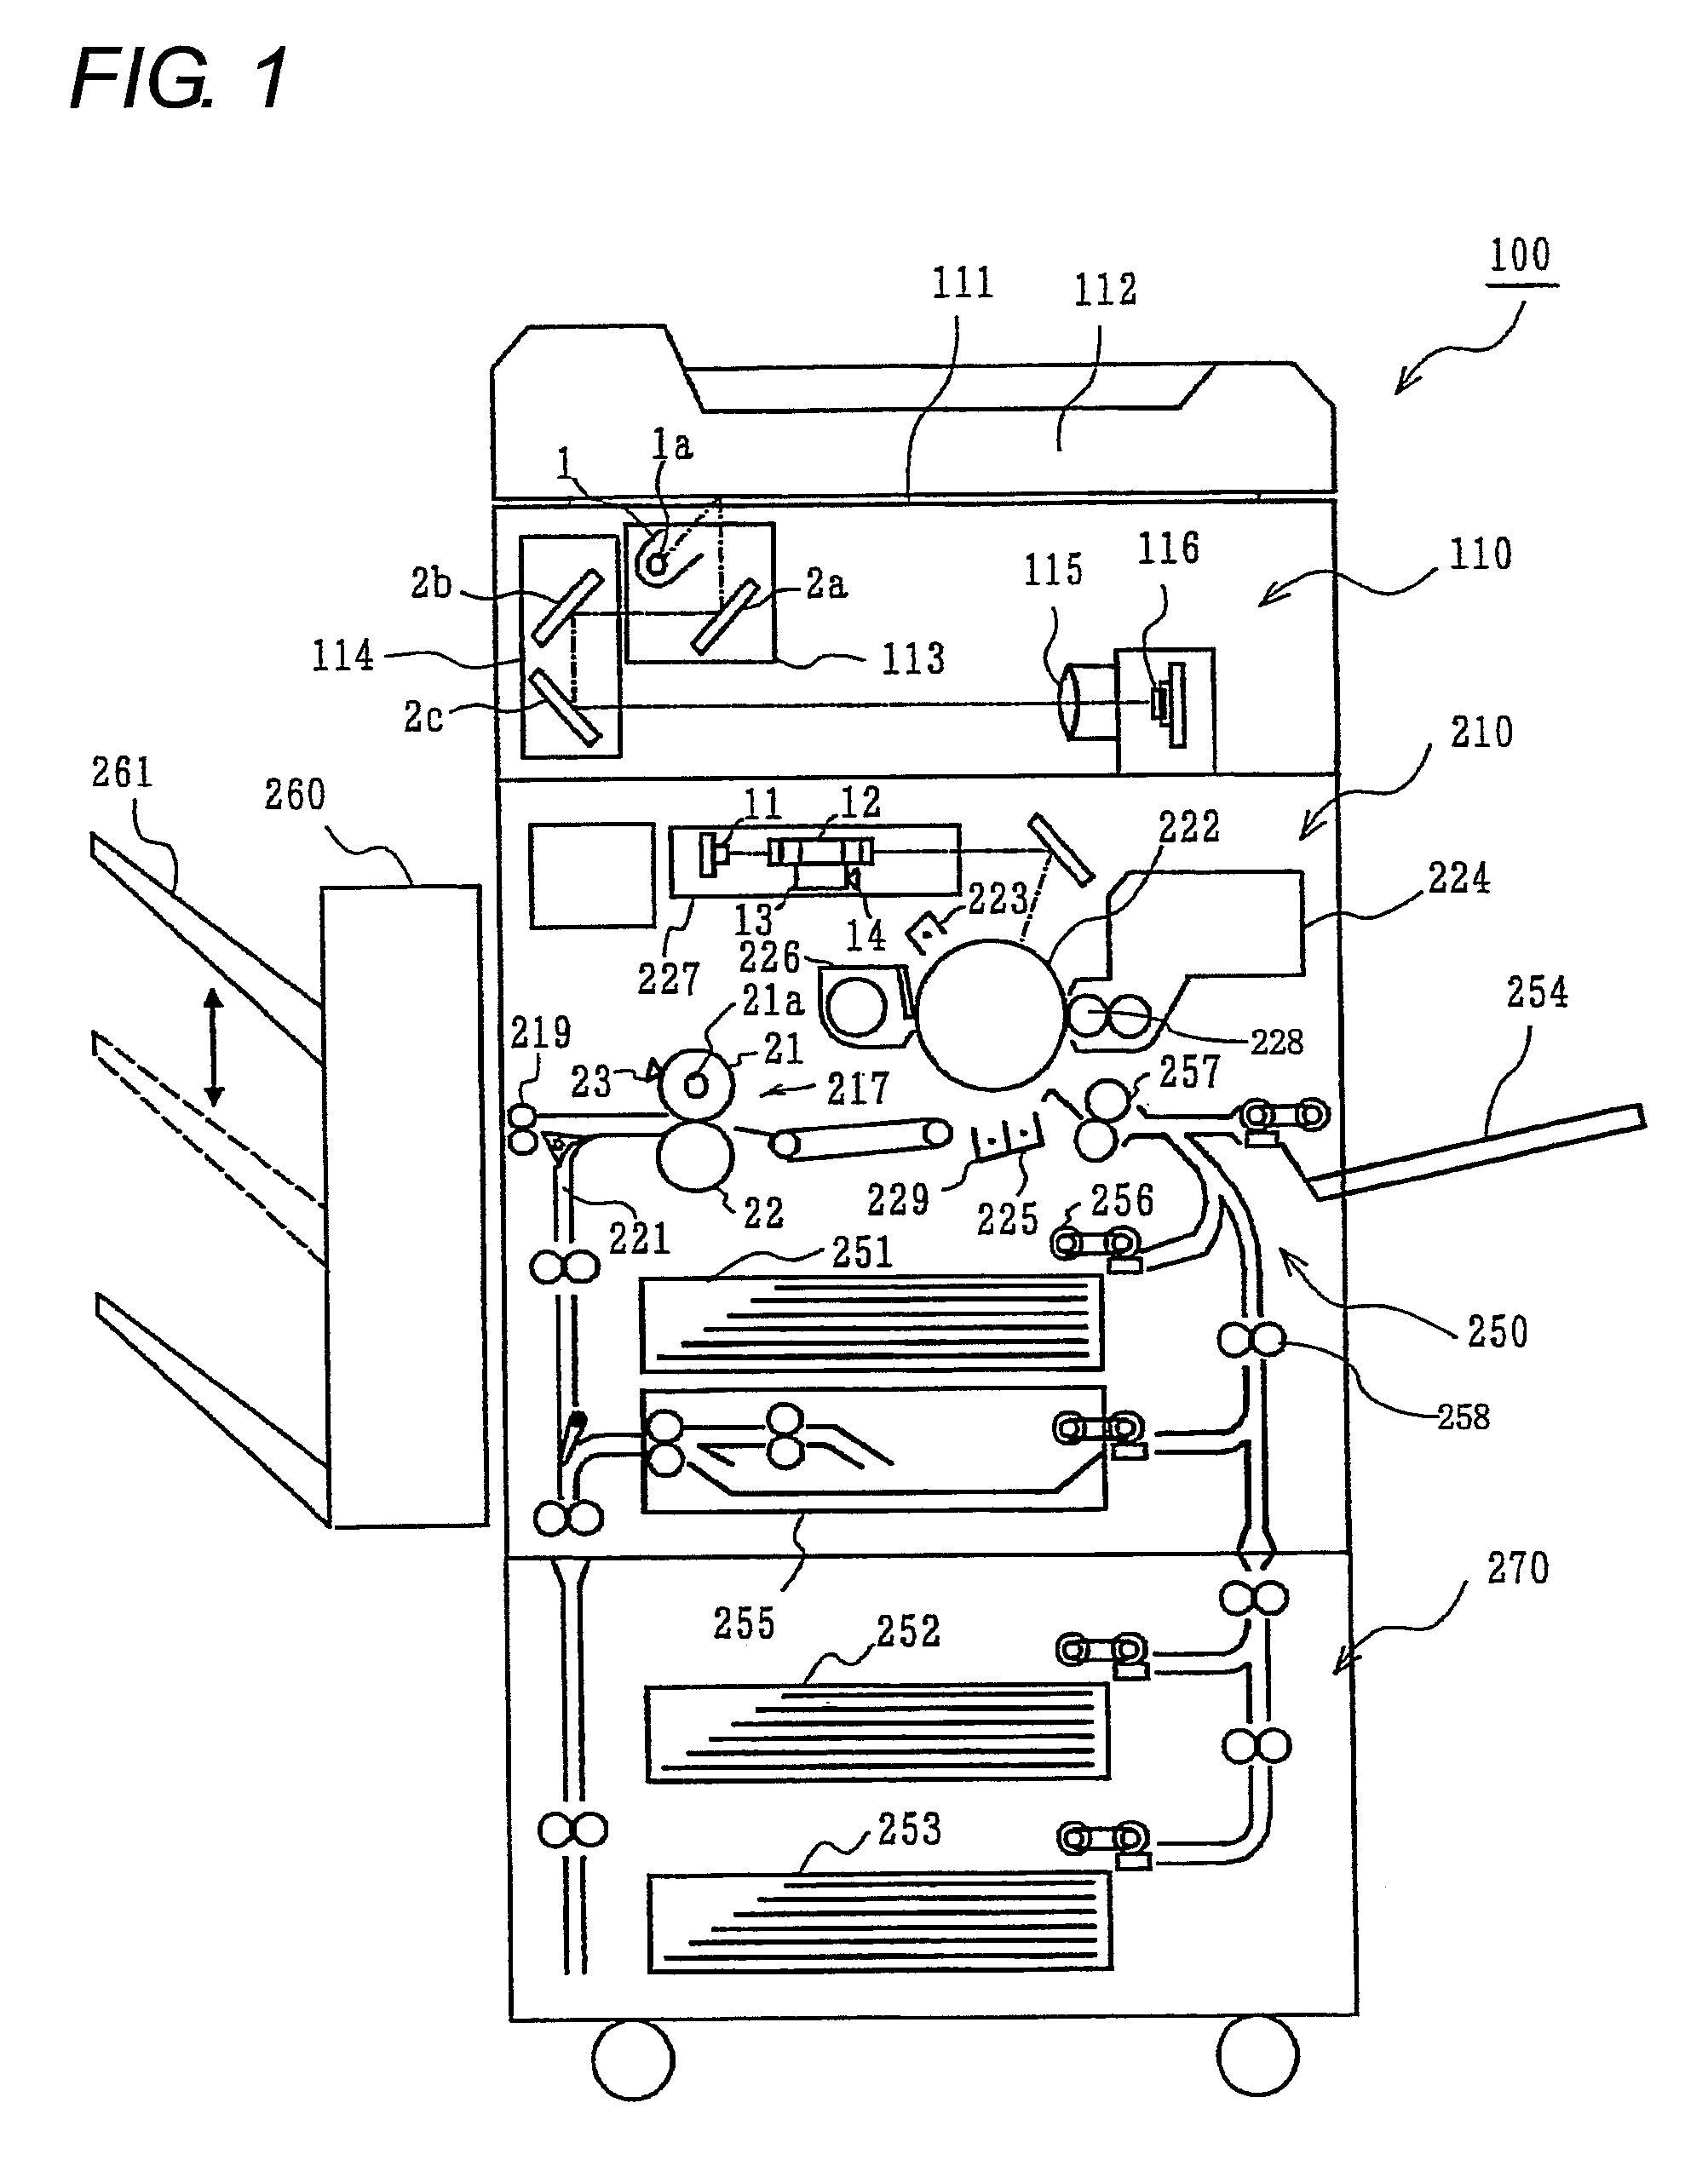 Image processing apparatus, image processing system and image processing program